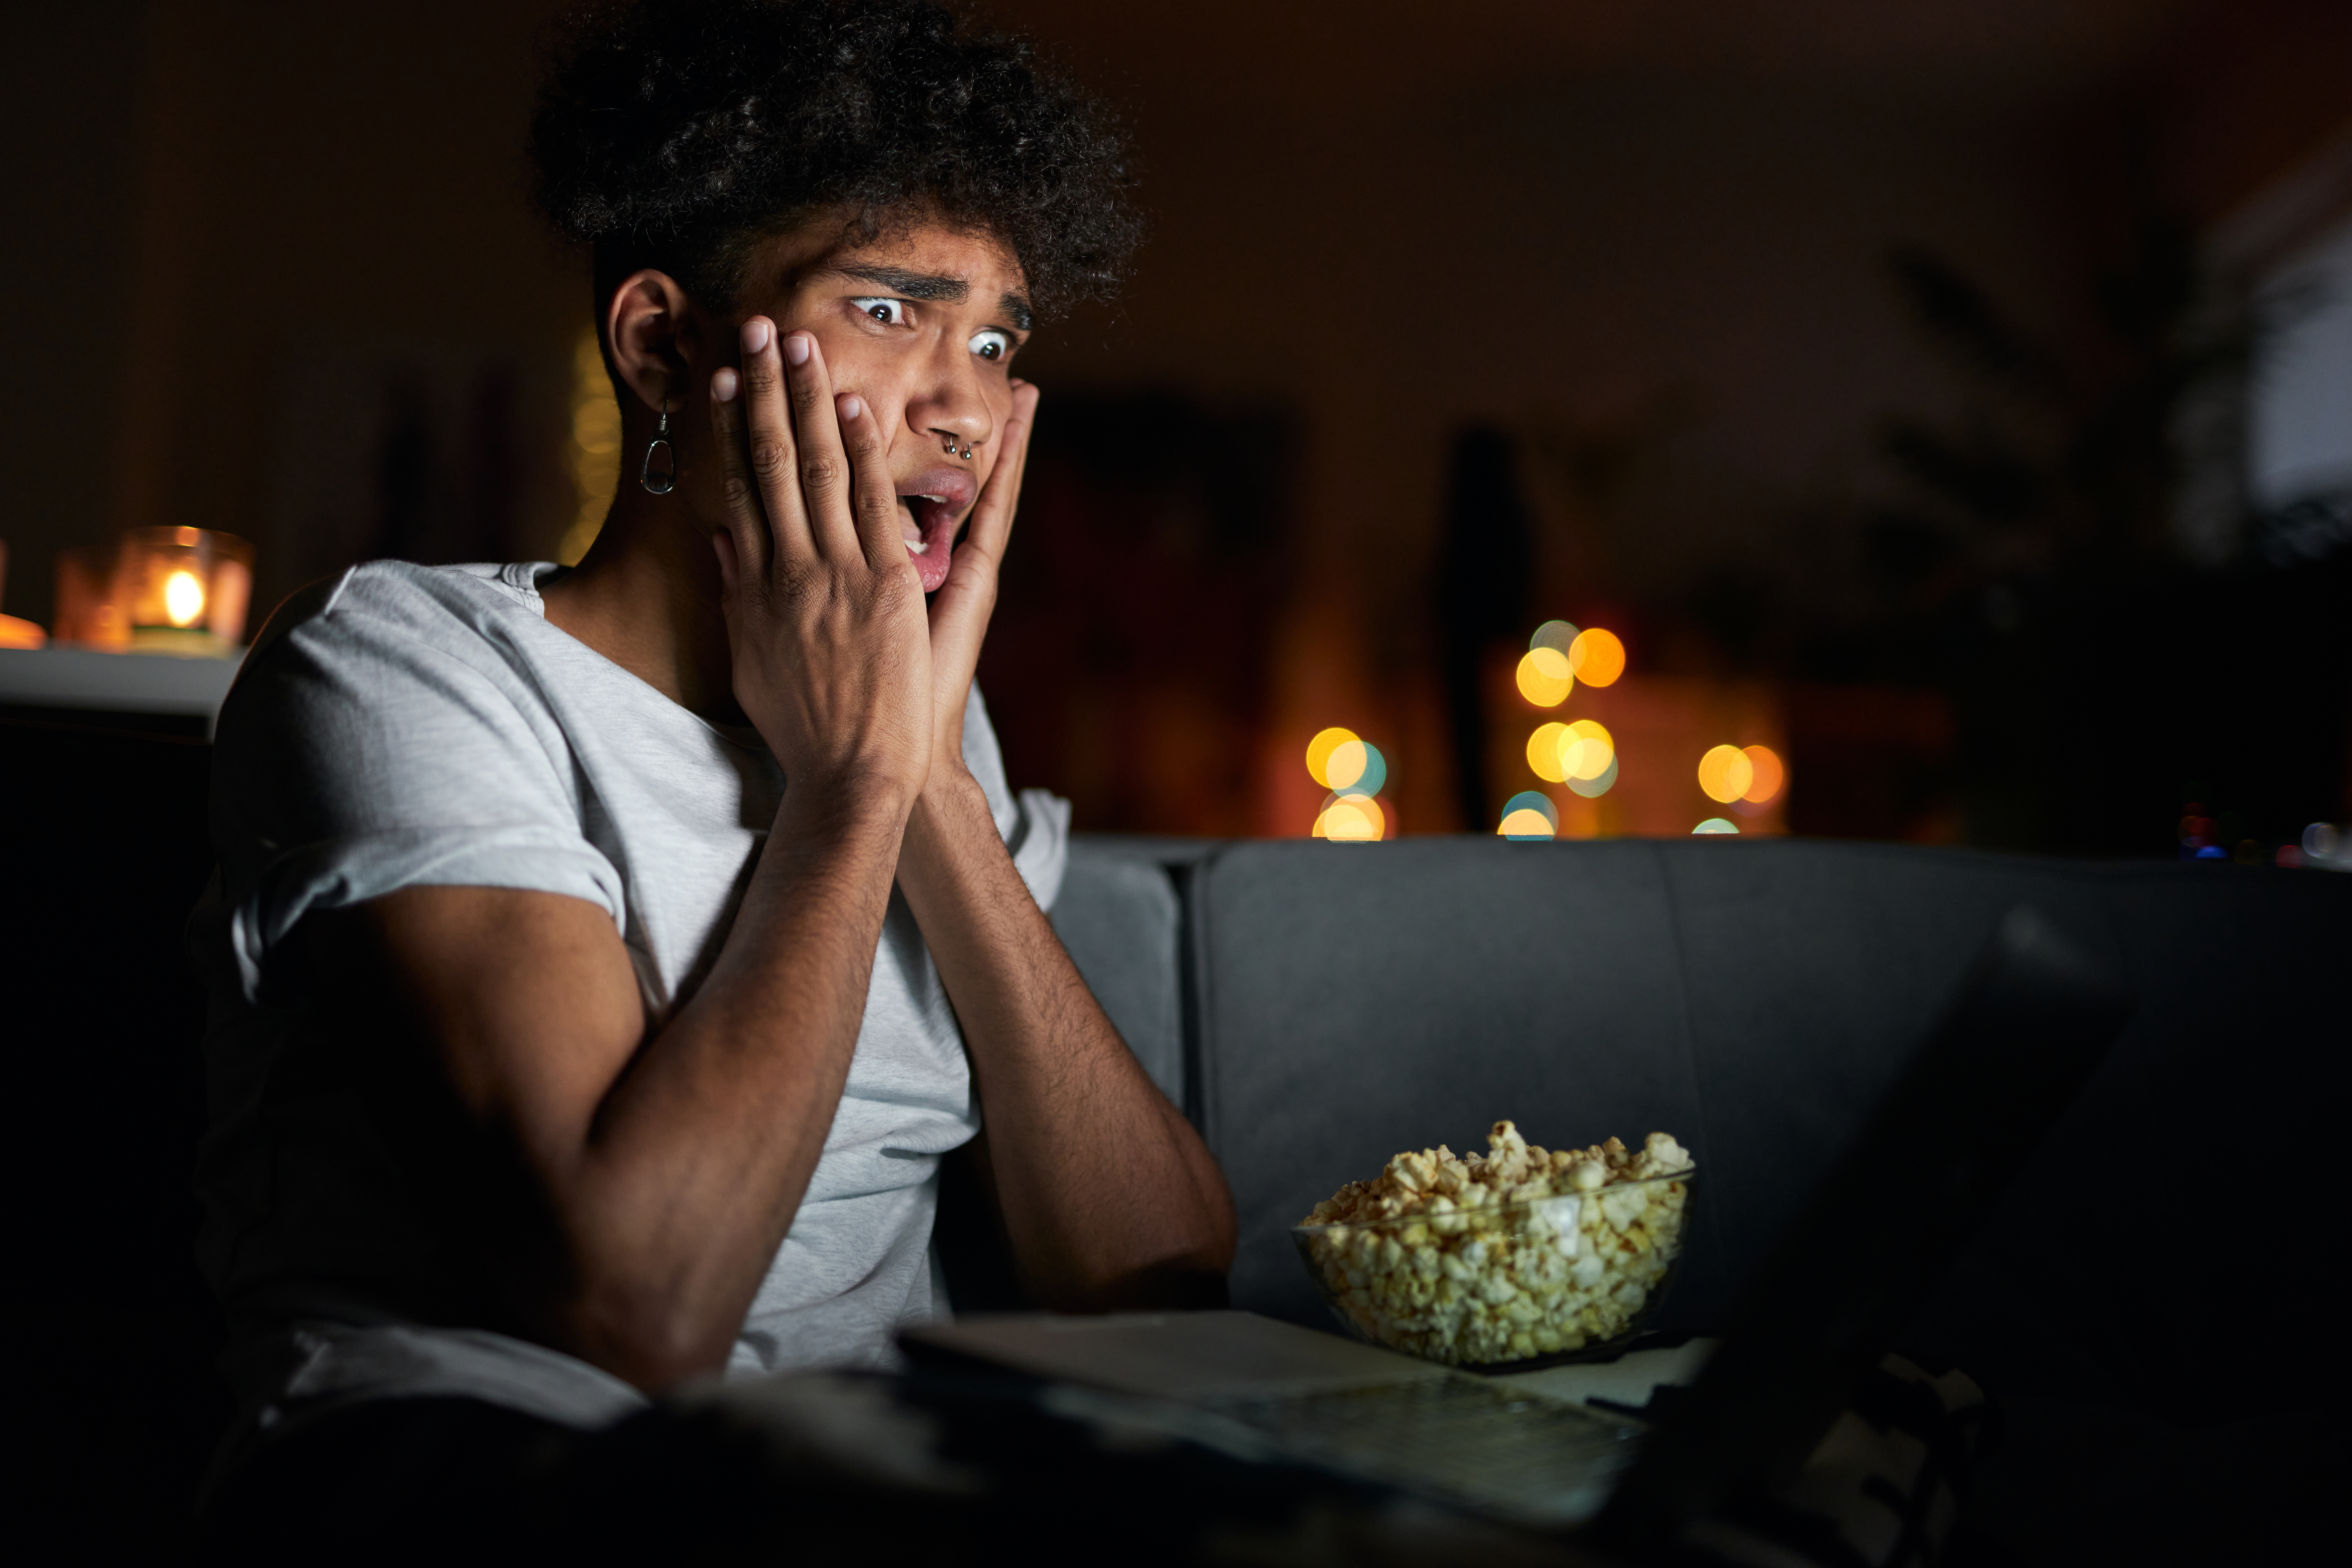 Man Turns Off News and Puts on Serial Killer Documentary to Relax